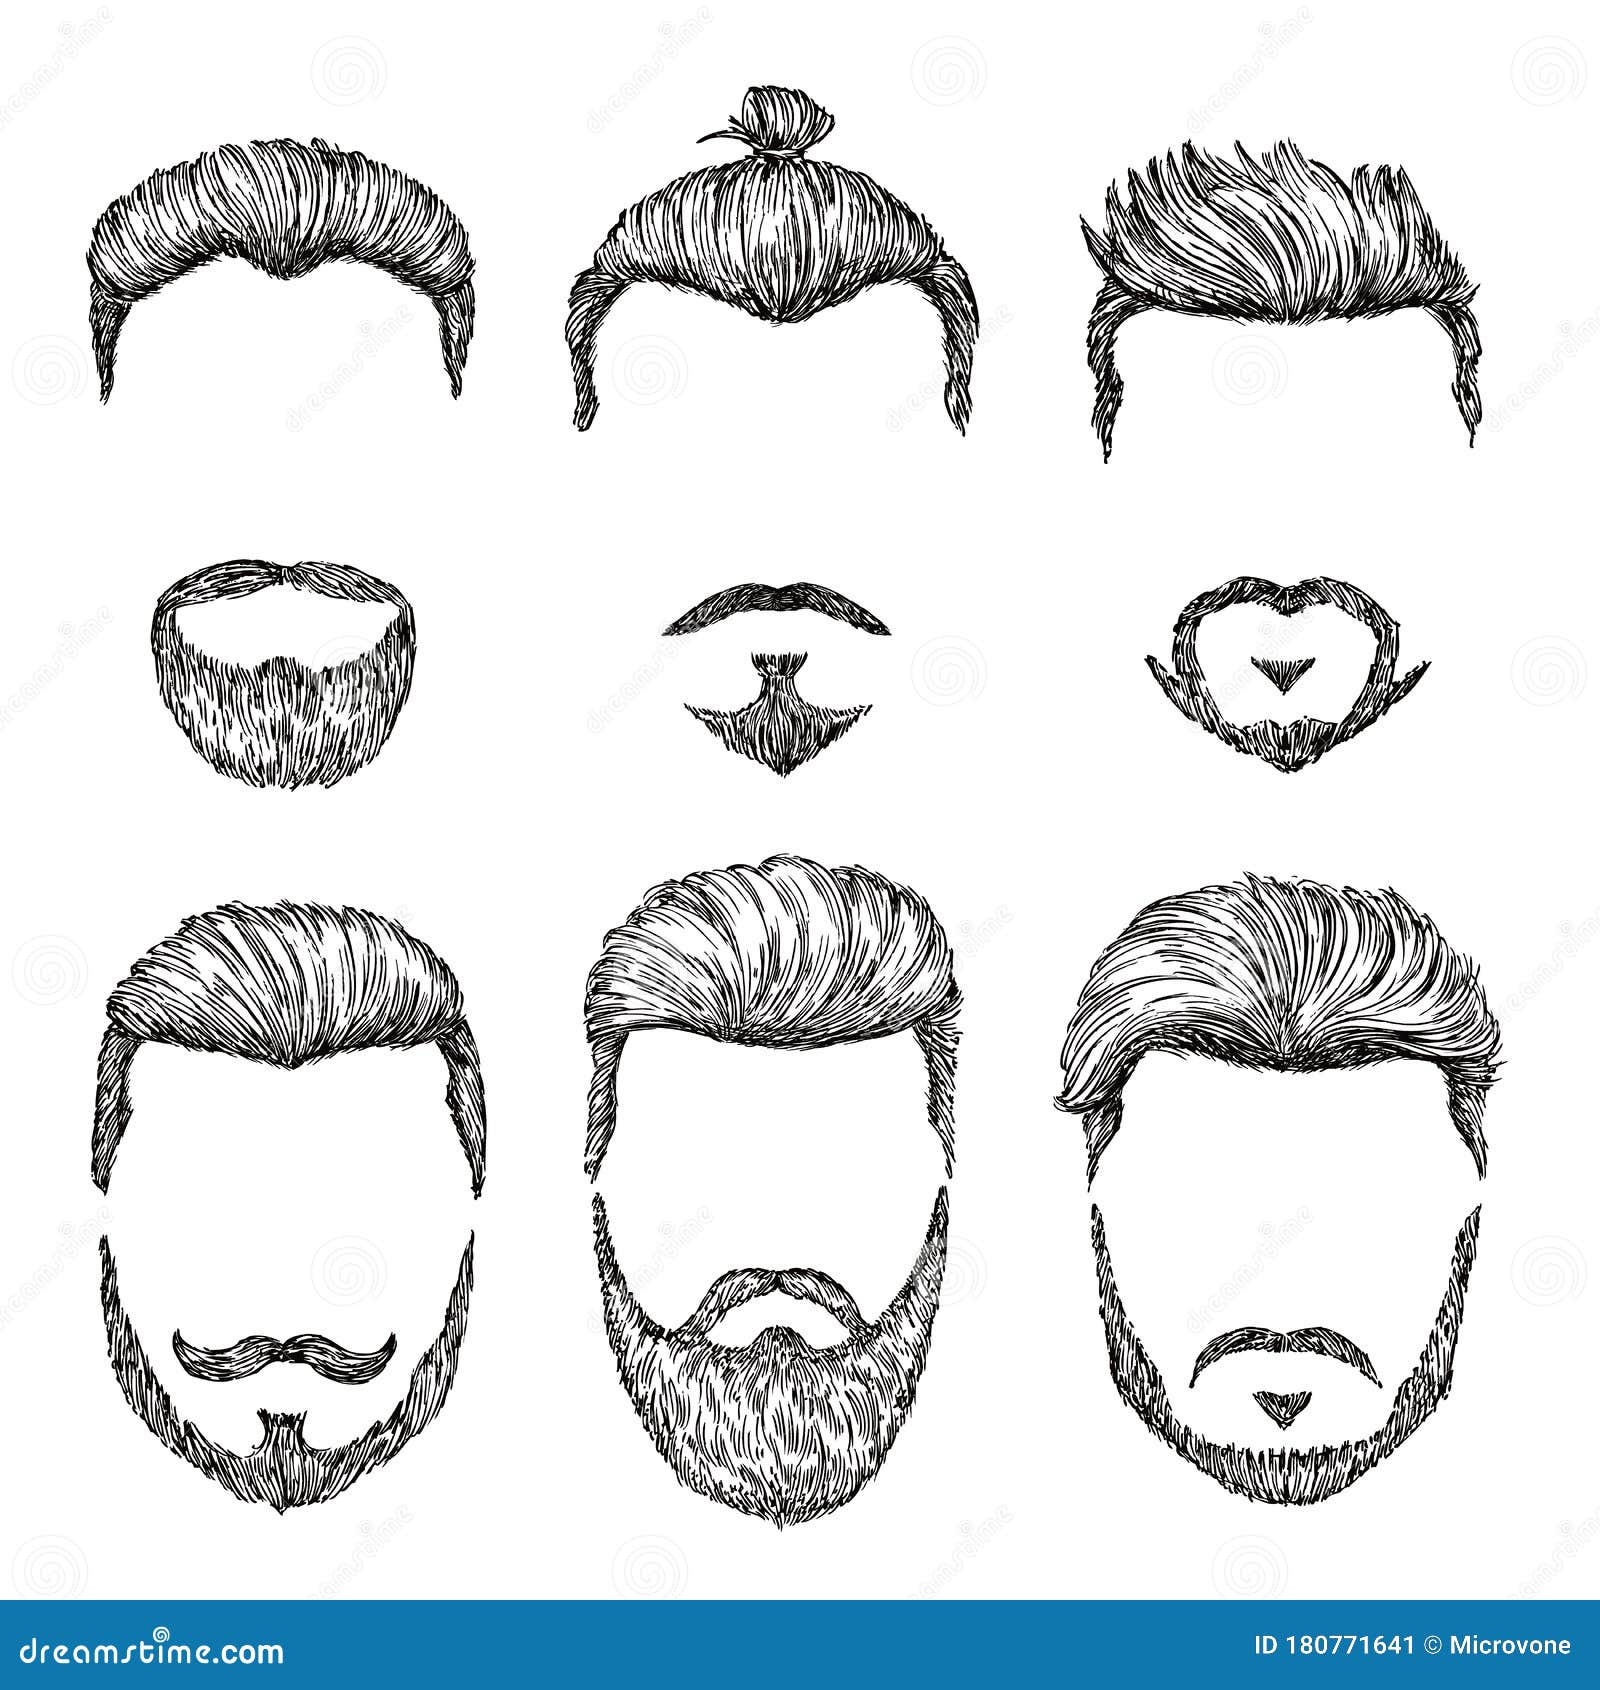 Hipster Haircut. Hand Drawn Vintage Hair Styles. Isolated Man Beards and  Moustache Models Stock Vector - Illustration of group, hairstyle: 180771641